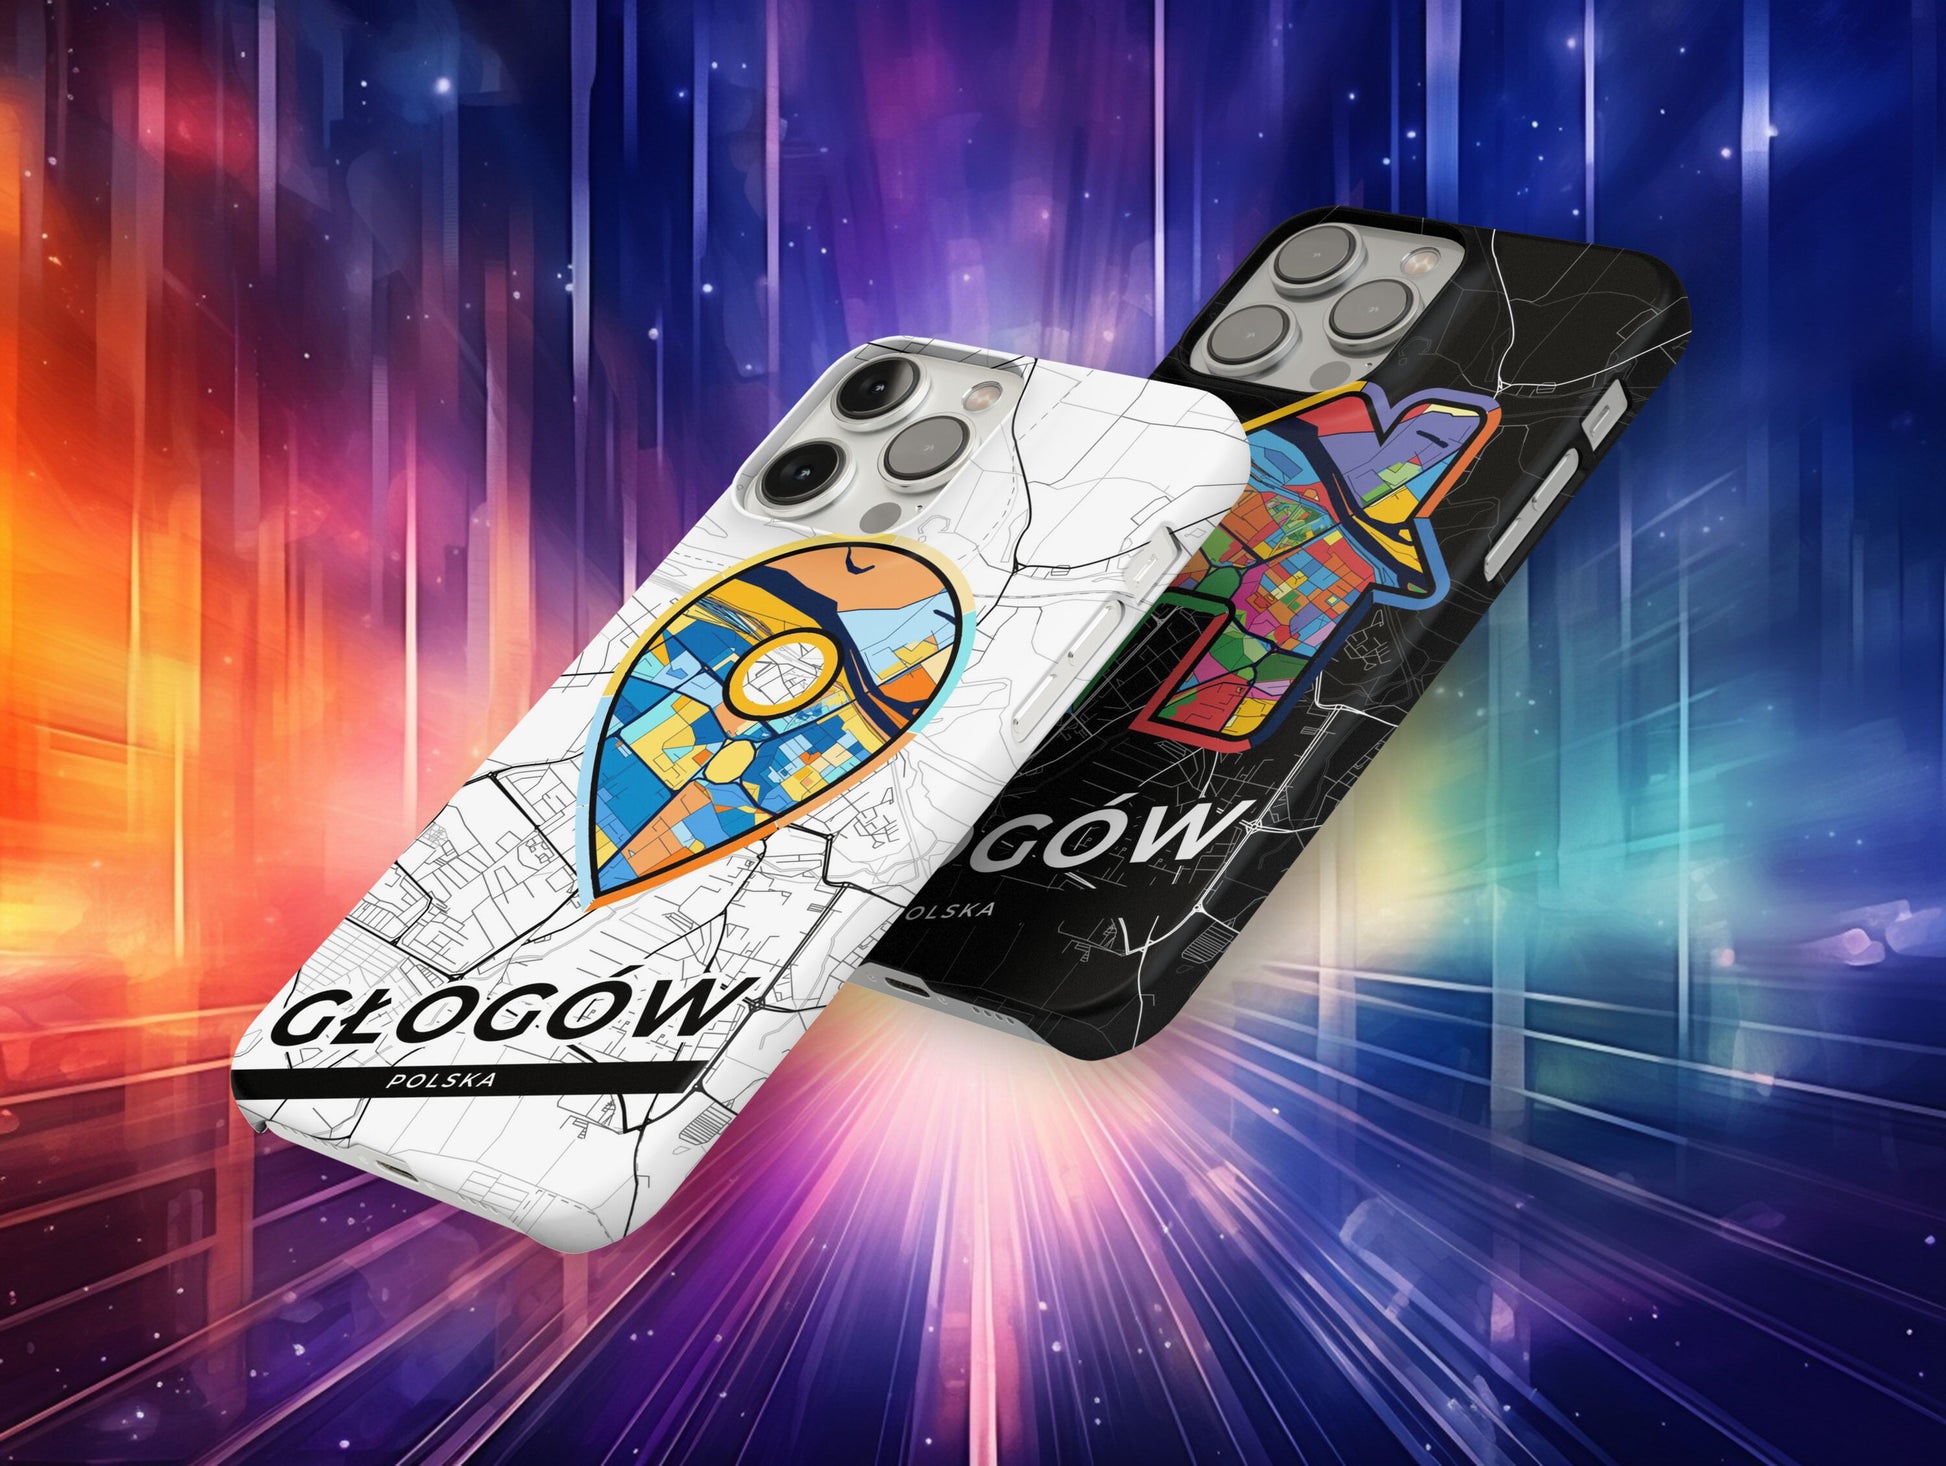 Głogów Poland slim phone case with colorful icon. Birthday, wedding or housewarming gift. Couple match cases.